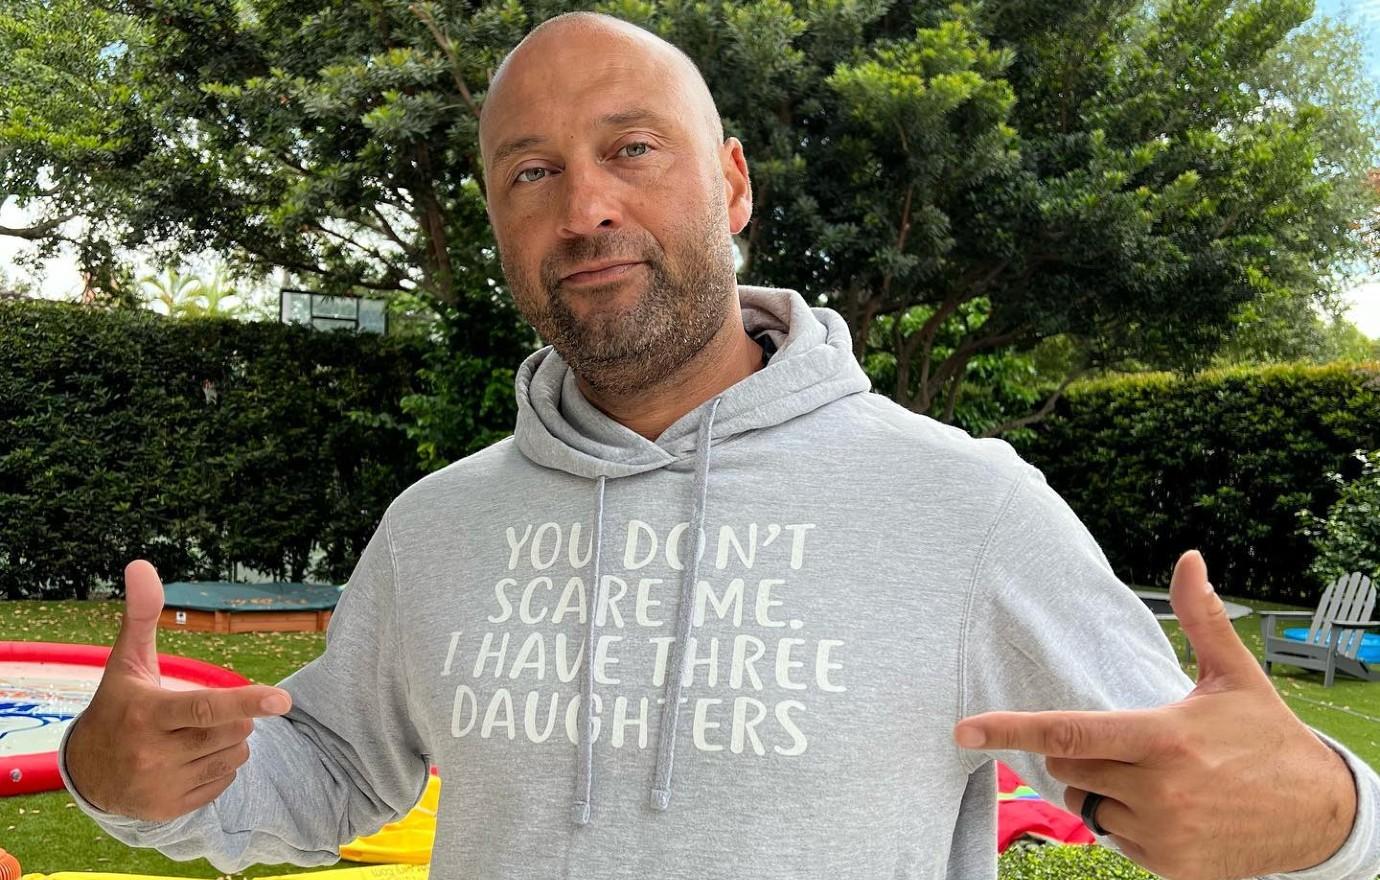 EXCLUSIVE: Derek Jeter and wife Hannah say life with four kids is 'fun  chaos,' they WON'T have a fifth and HE does school pick ups: 'Life is  great!